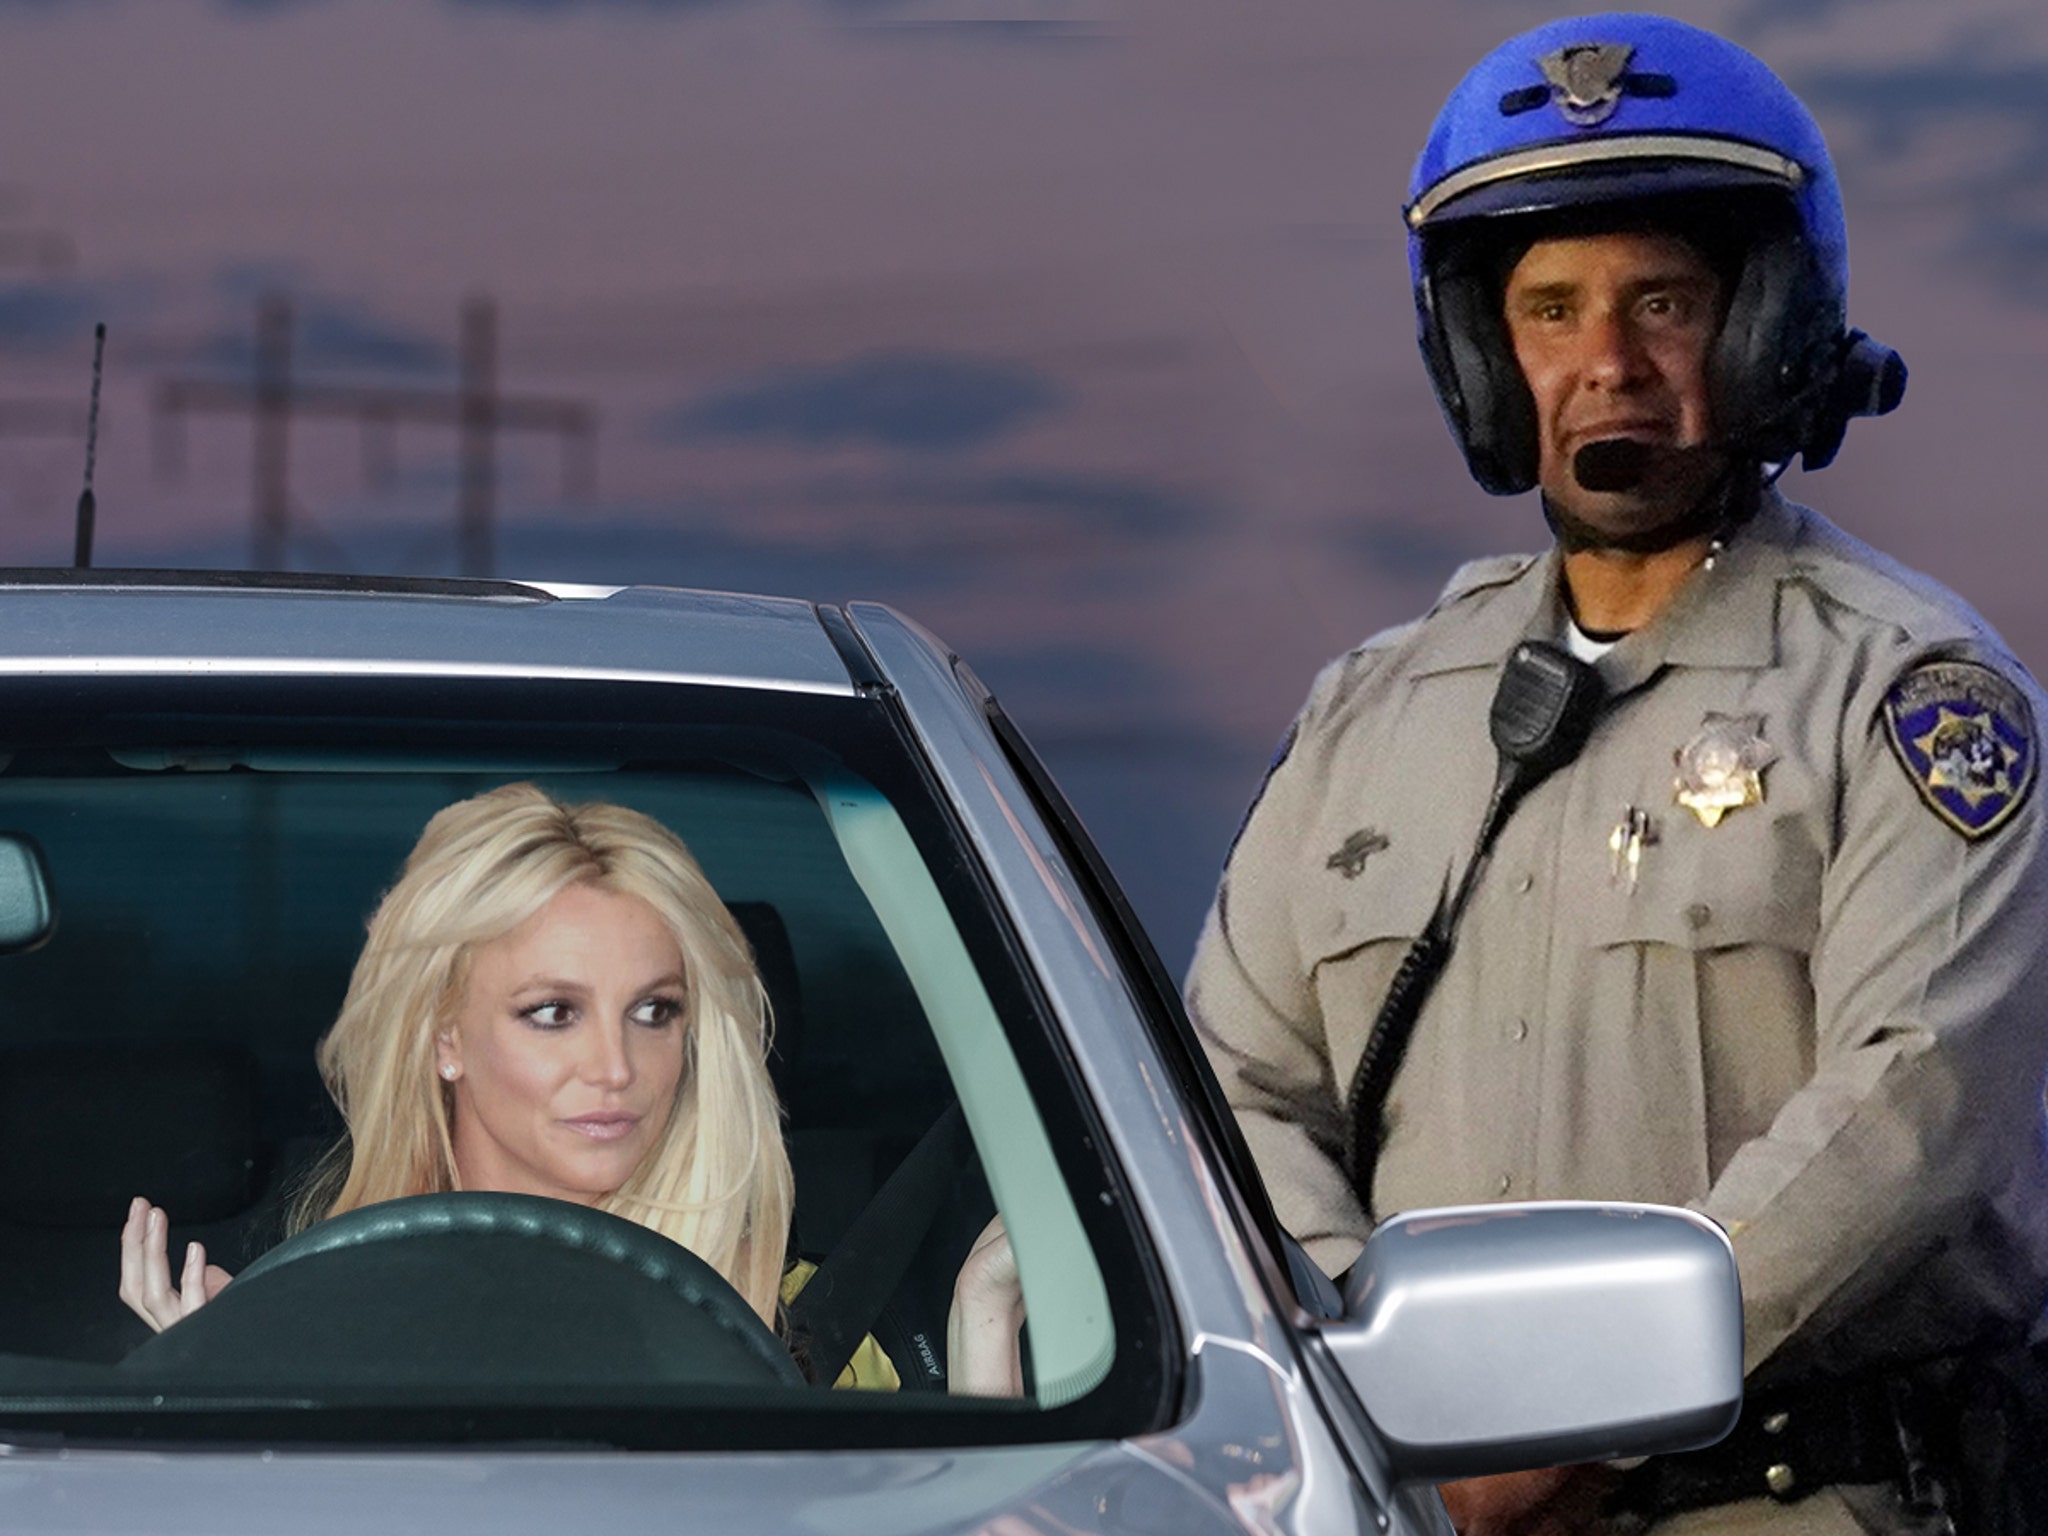 Britney Spears Ticketed for Driving Without License and Insurance